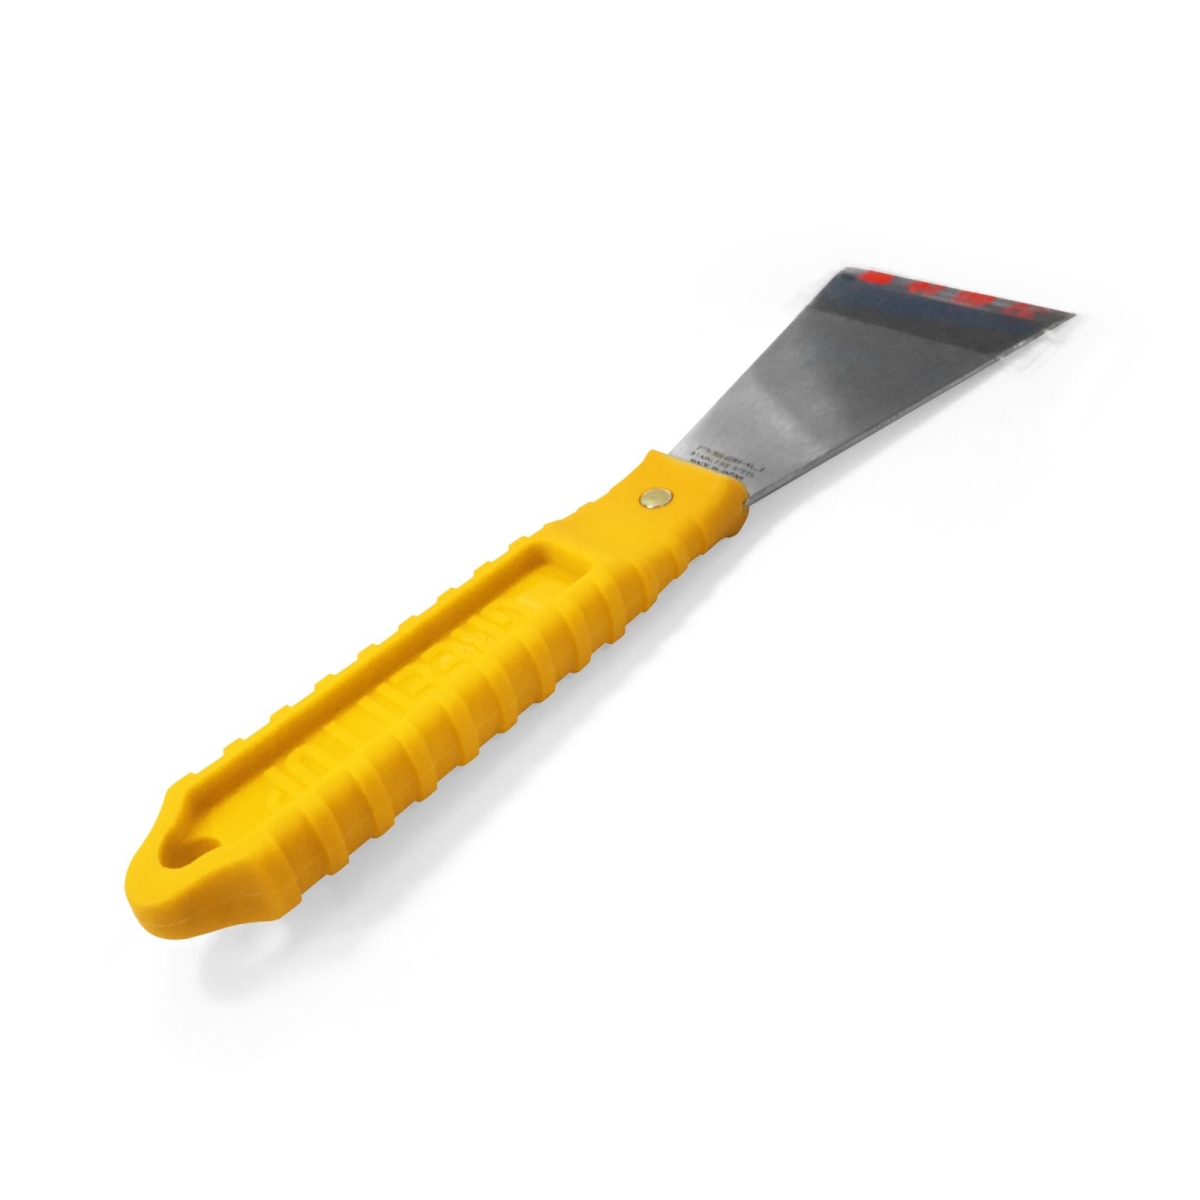 2.2 In. Blade Stainless Steel Straight Y-shaped Scraper Knife, Yellow